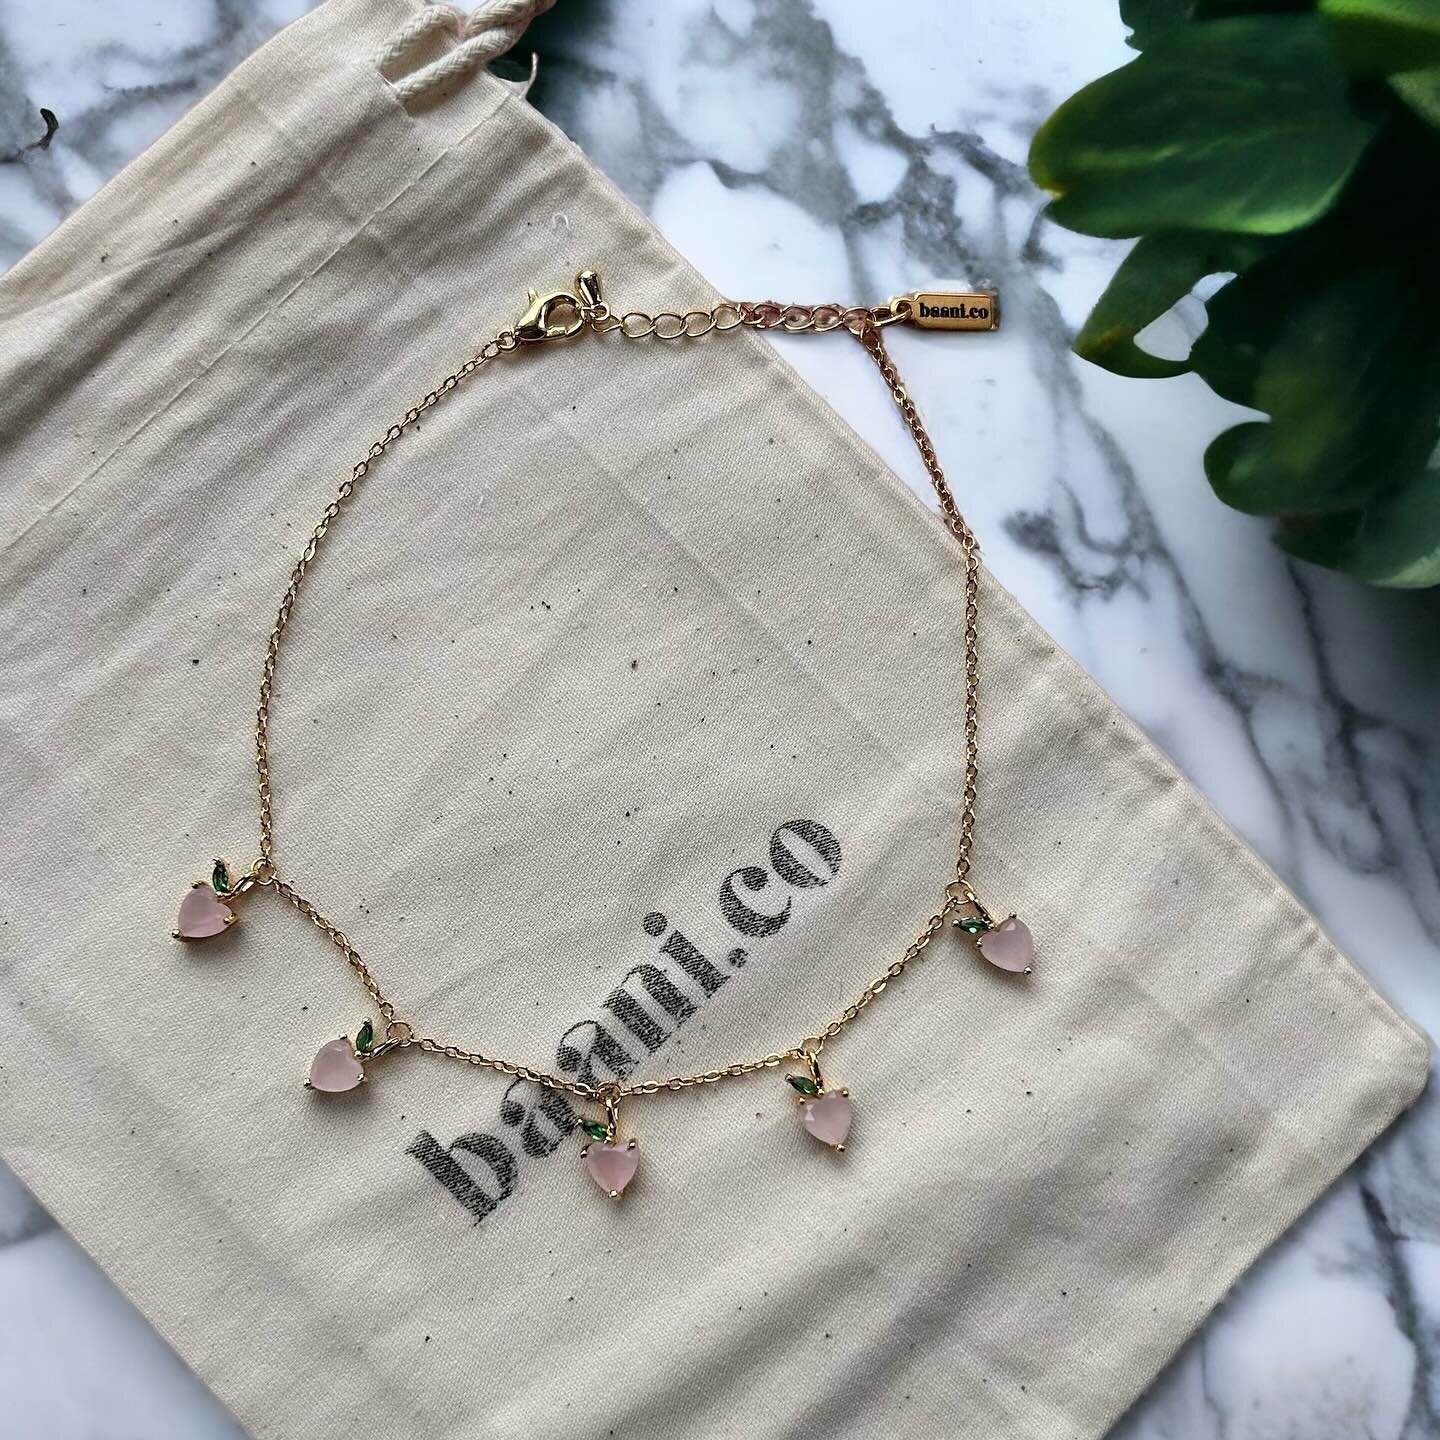 Kind of obsessed right now with our Peachy Anklet 💓💓💓